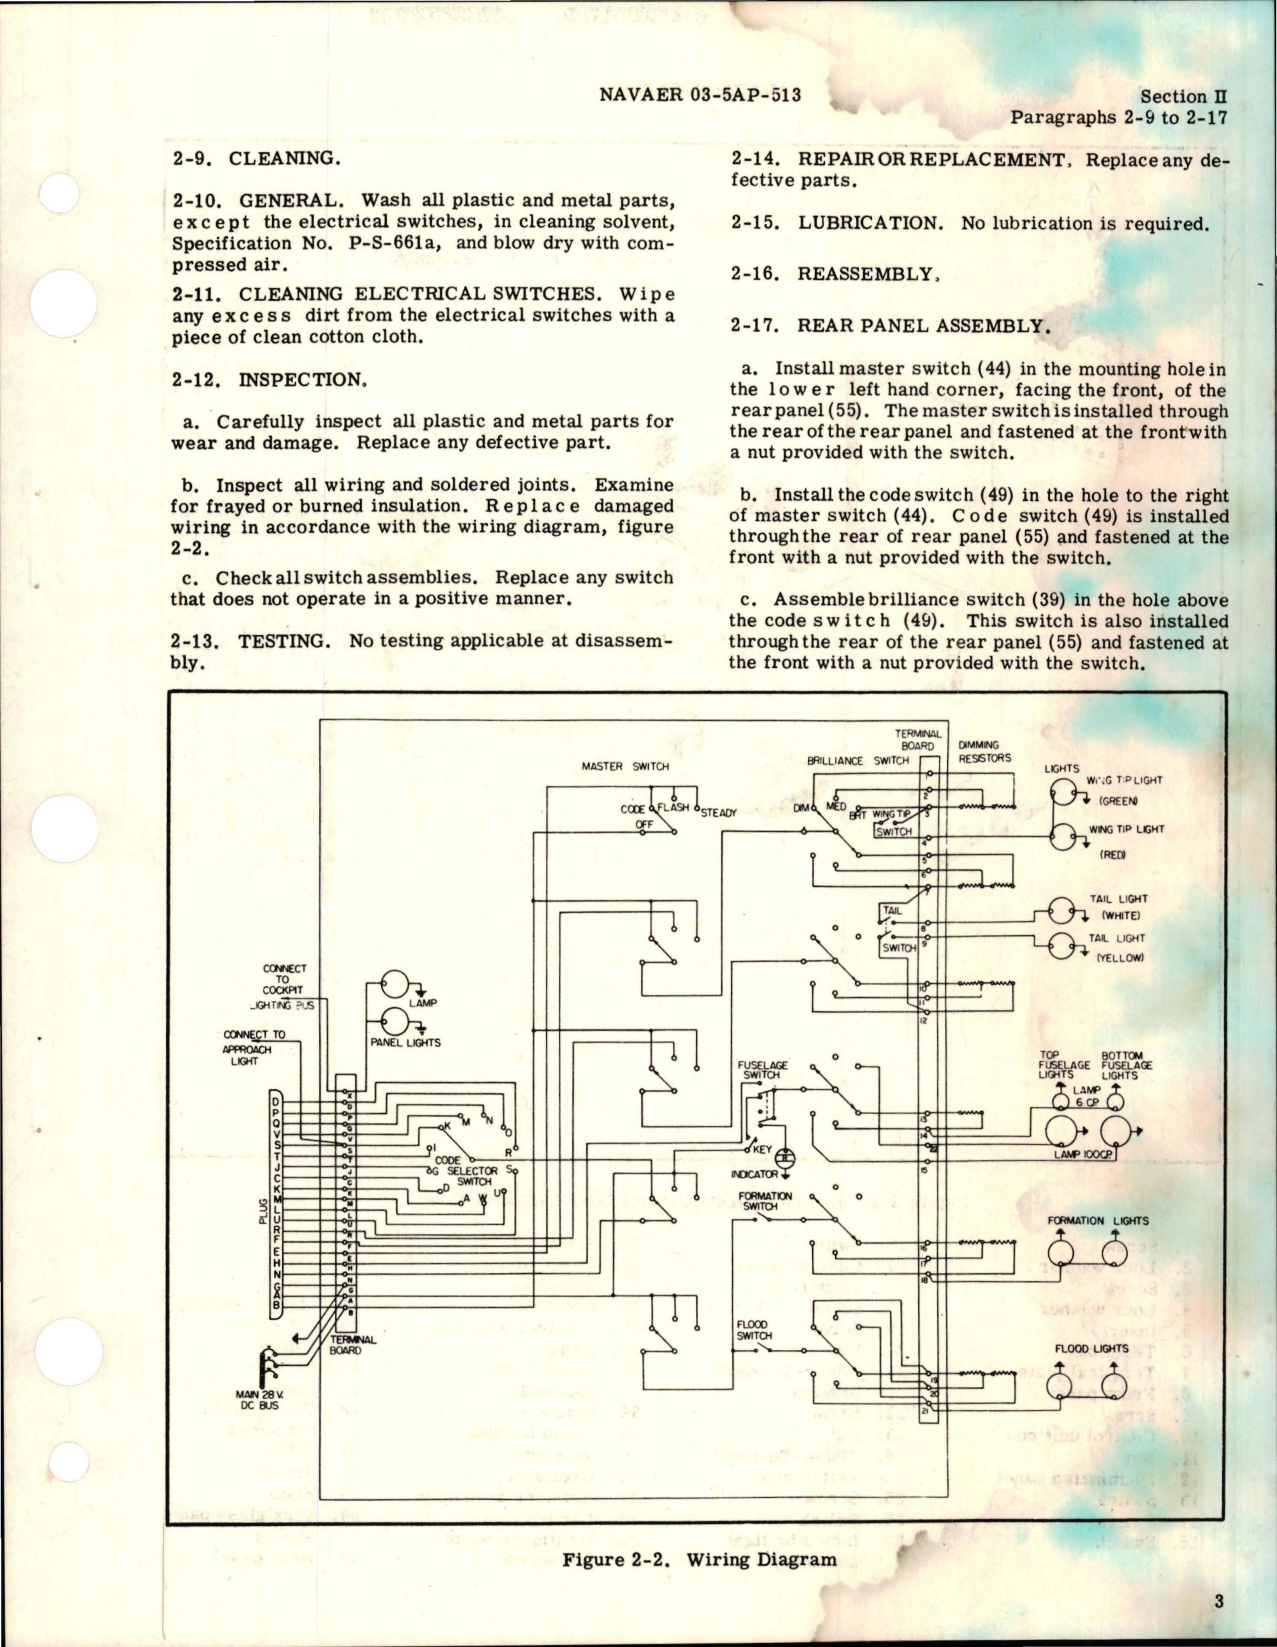 Sample page 7 from AirCorps Library document: Overhaul Instructions for Exterior Lights Control Box - Parts G-3566A-1 and G-3566A-2